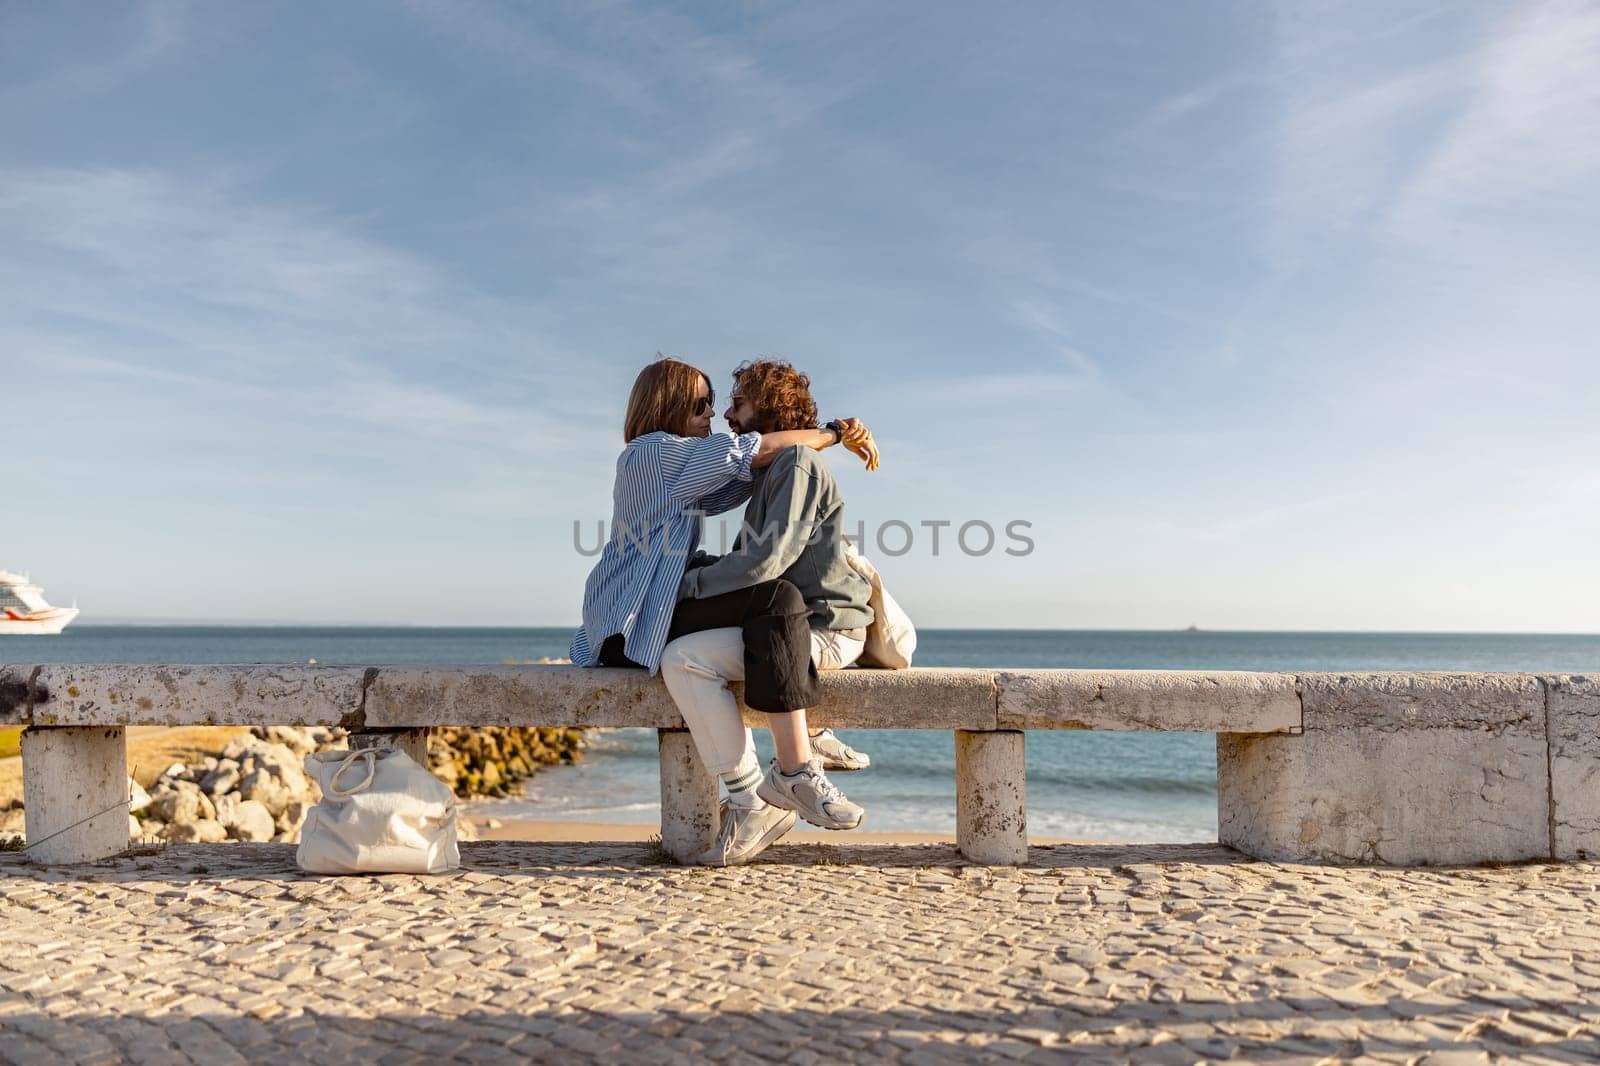 Couple in love is hugging and look into each other's eyes while sitting bench on beach near ocean by Yaroslav_astakhov